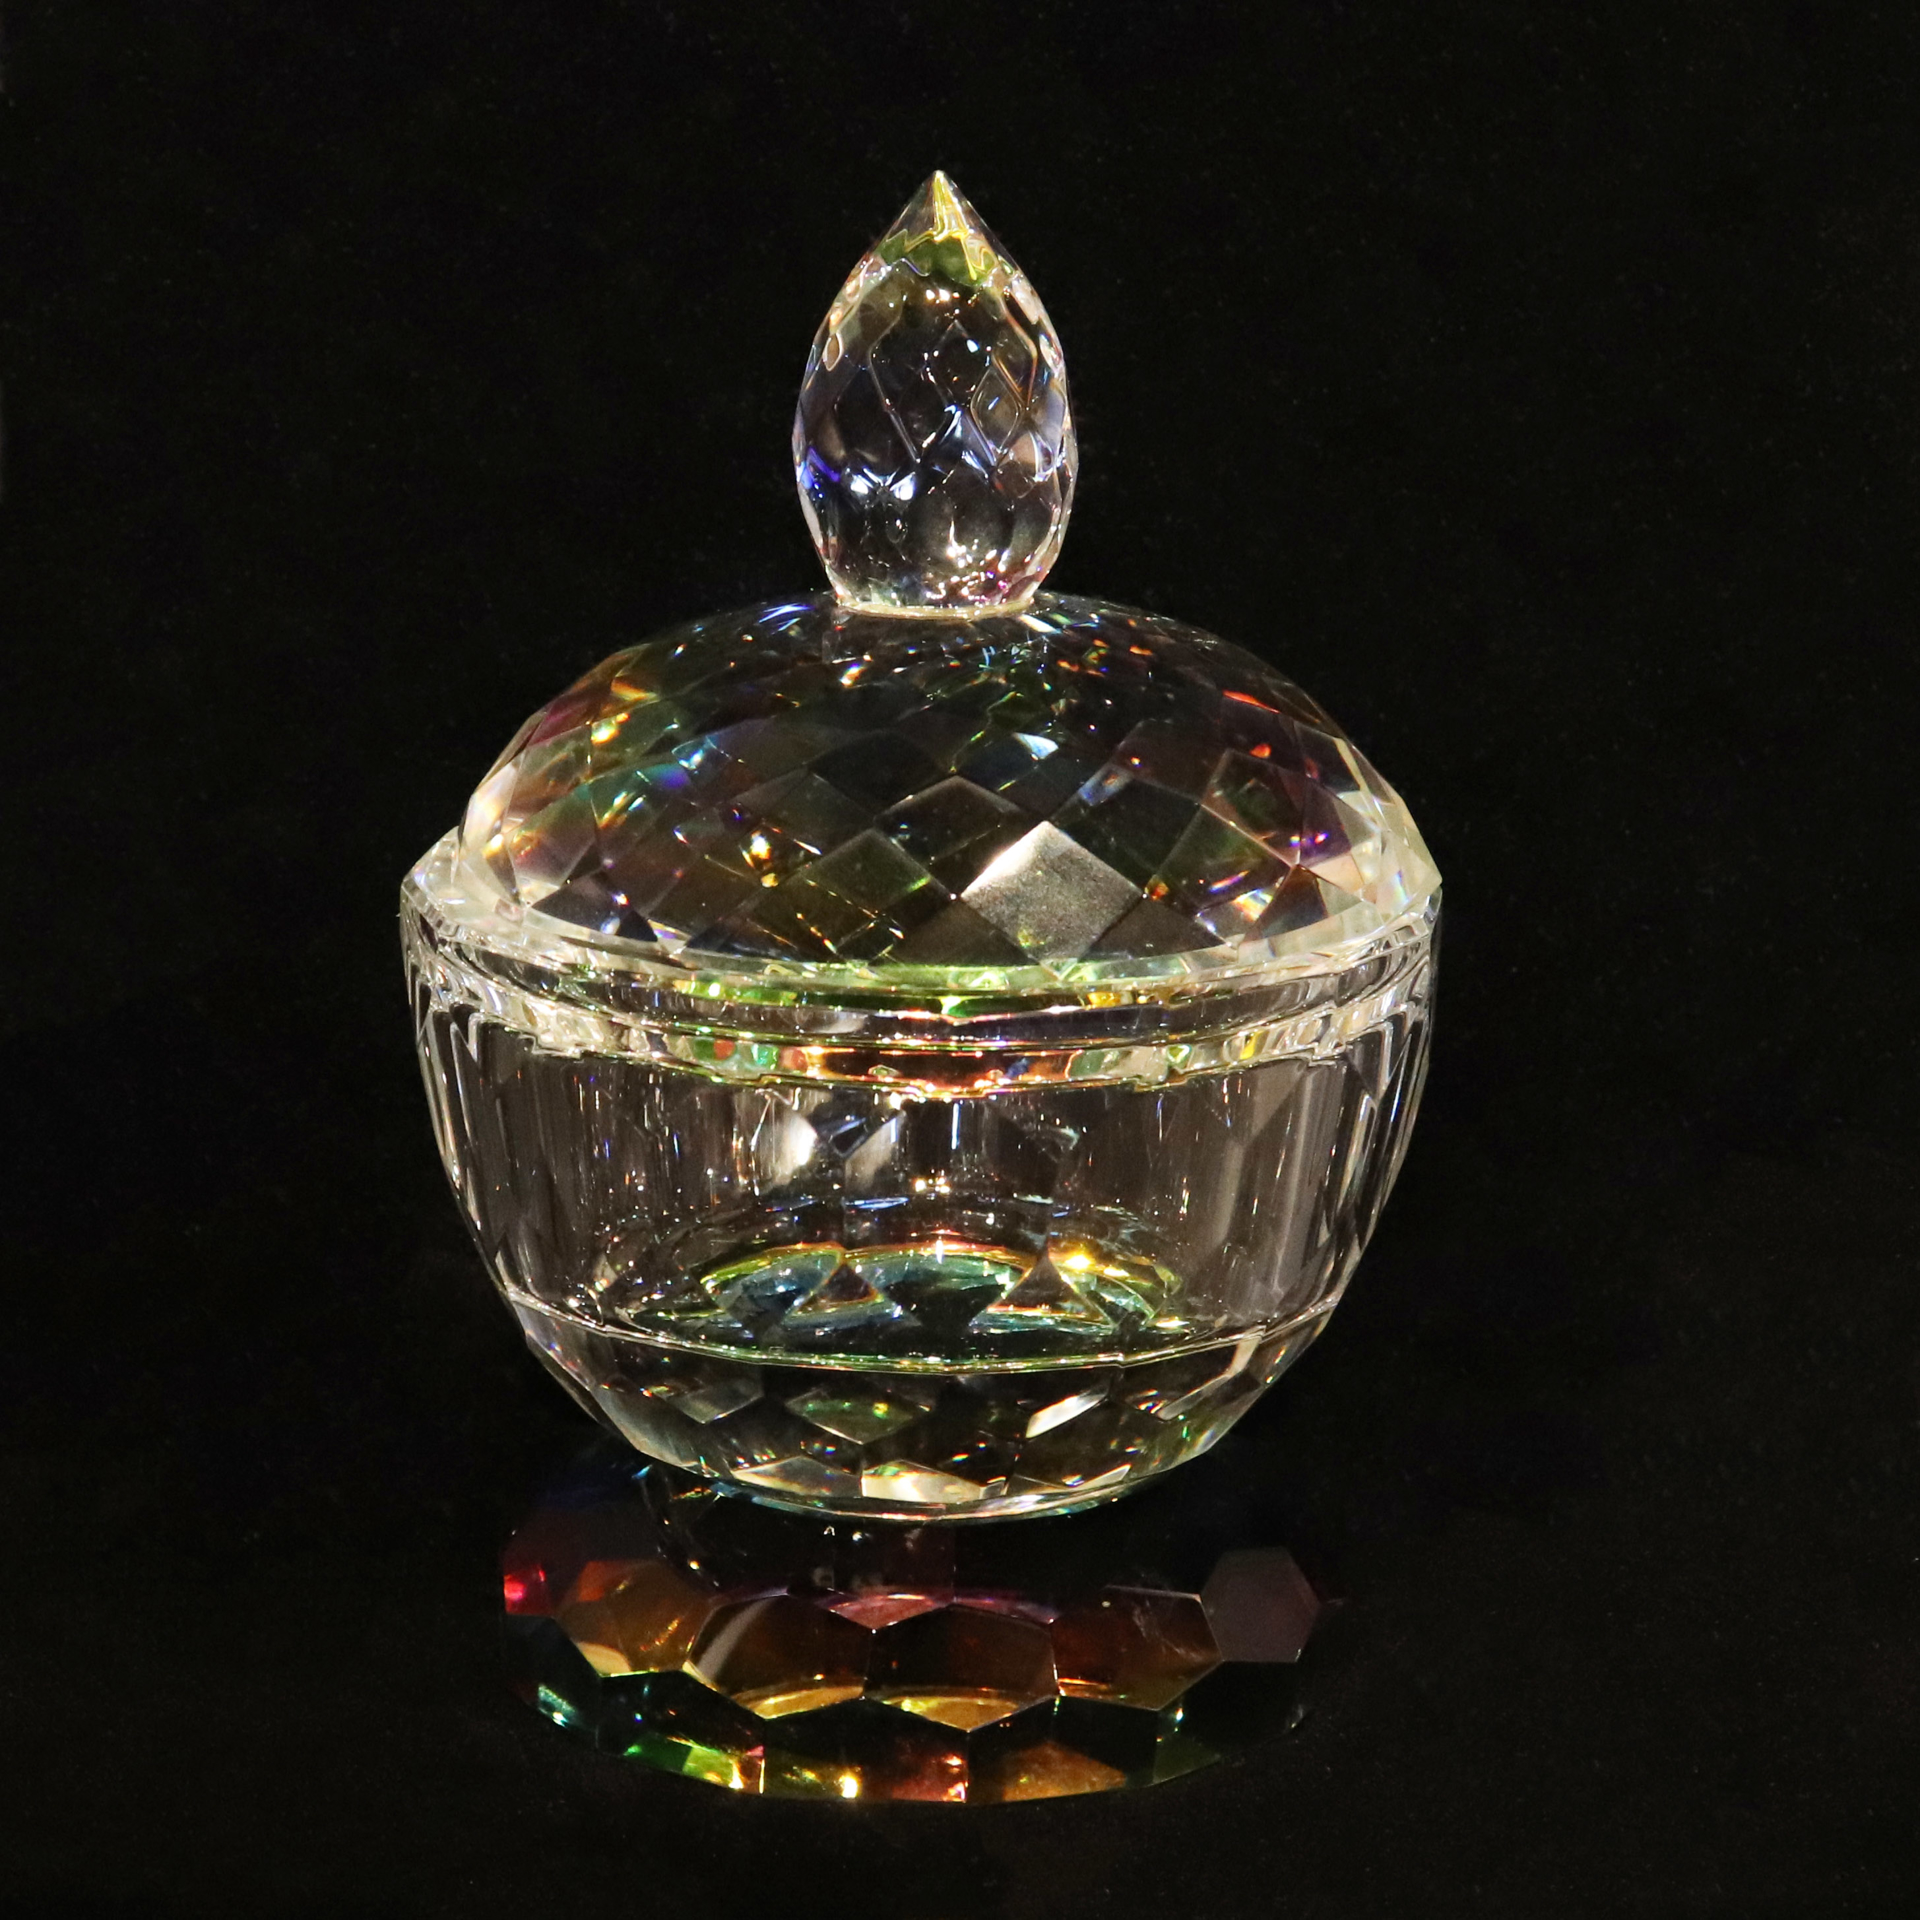 Crystal Candy Dish Small 4"x4" by Harold Lustig